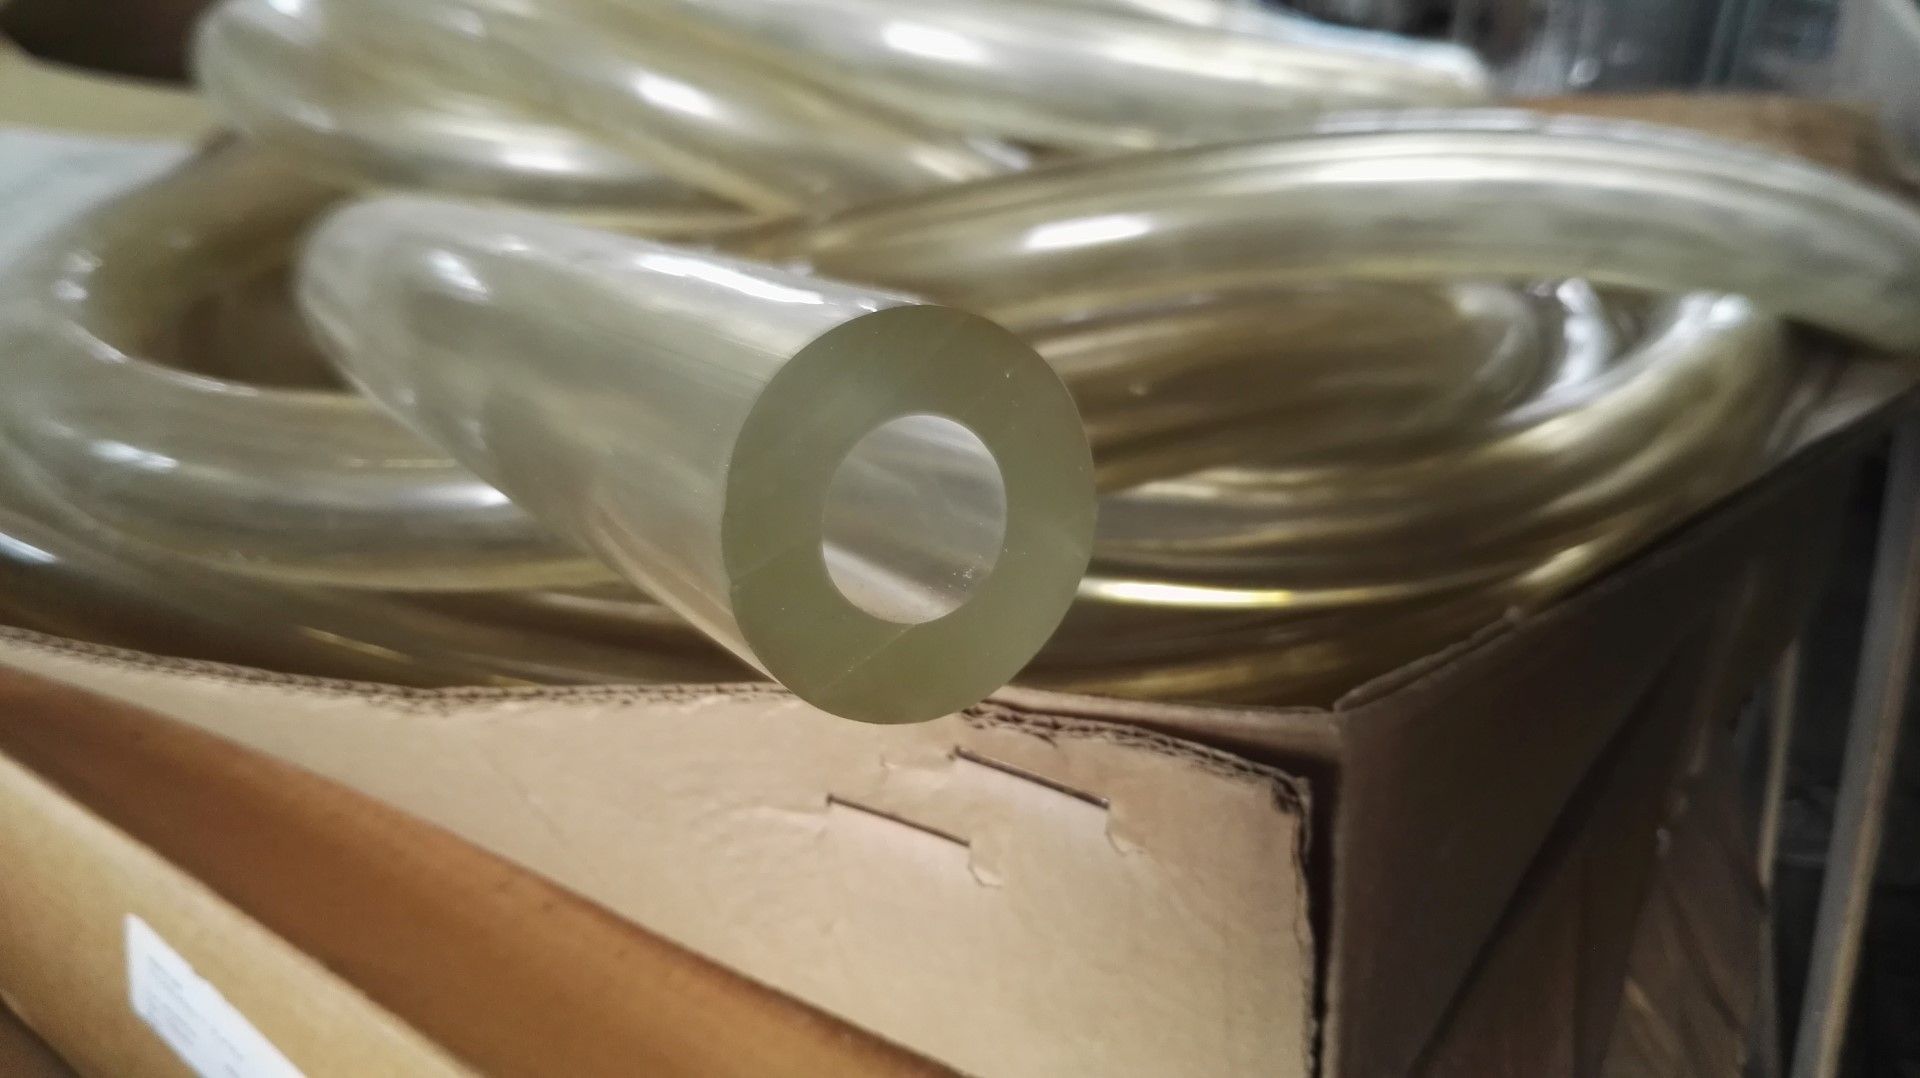 1 x Tygon 2" Wide Flexible Transparent Tubing - 50Ft Long - CL185 - Ref: R3603 - Location: Stoke-